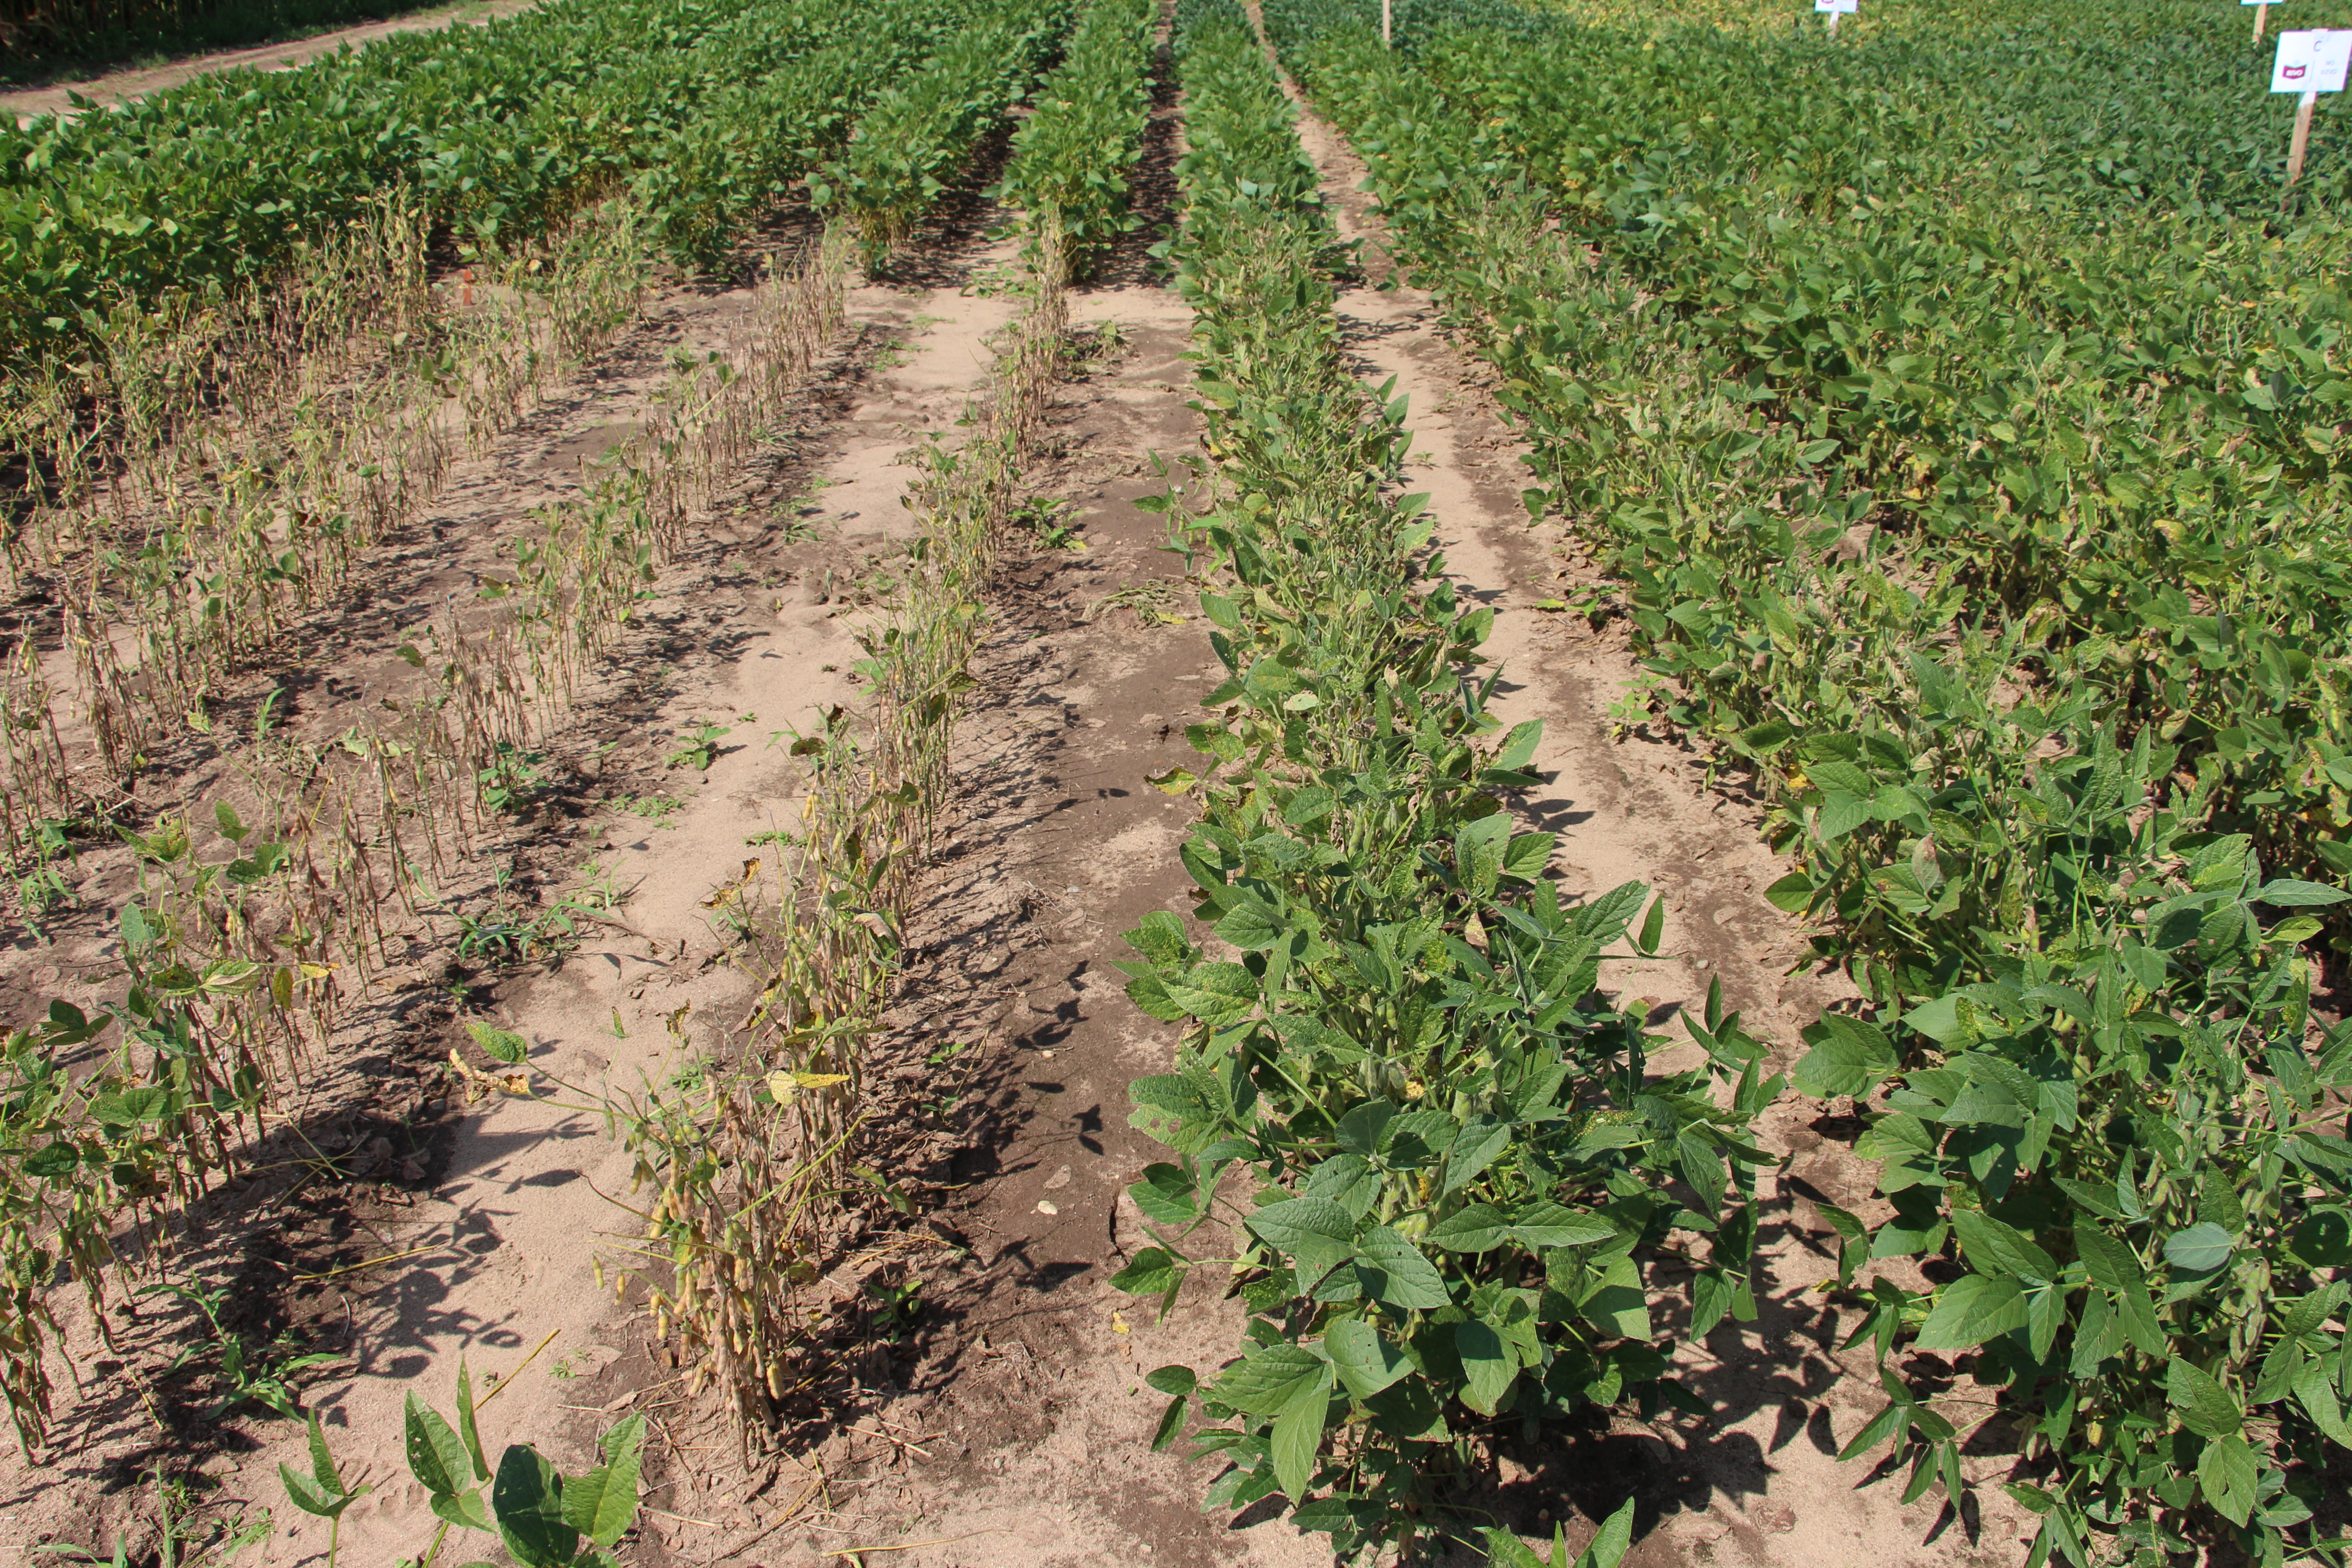 Soybean variety susceptible to sudden death syndrome (left) compared to a more resistant variety.